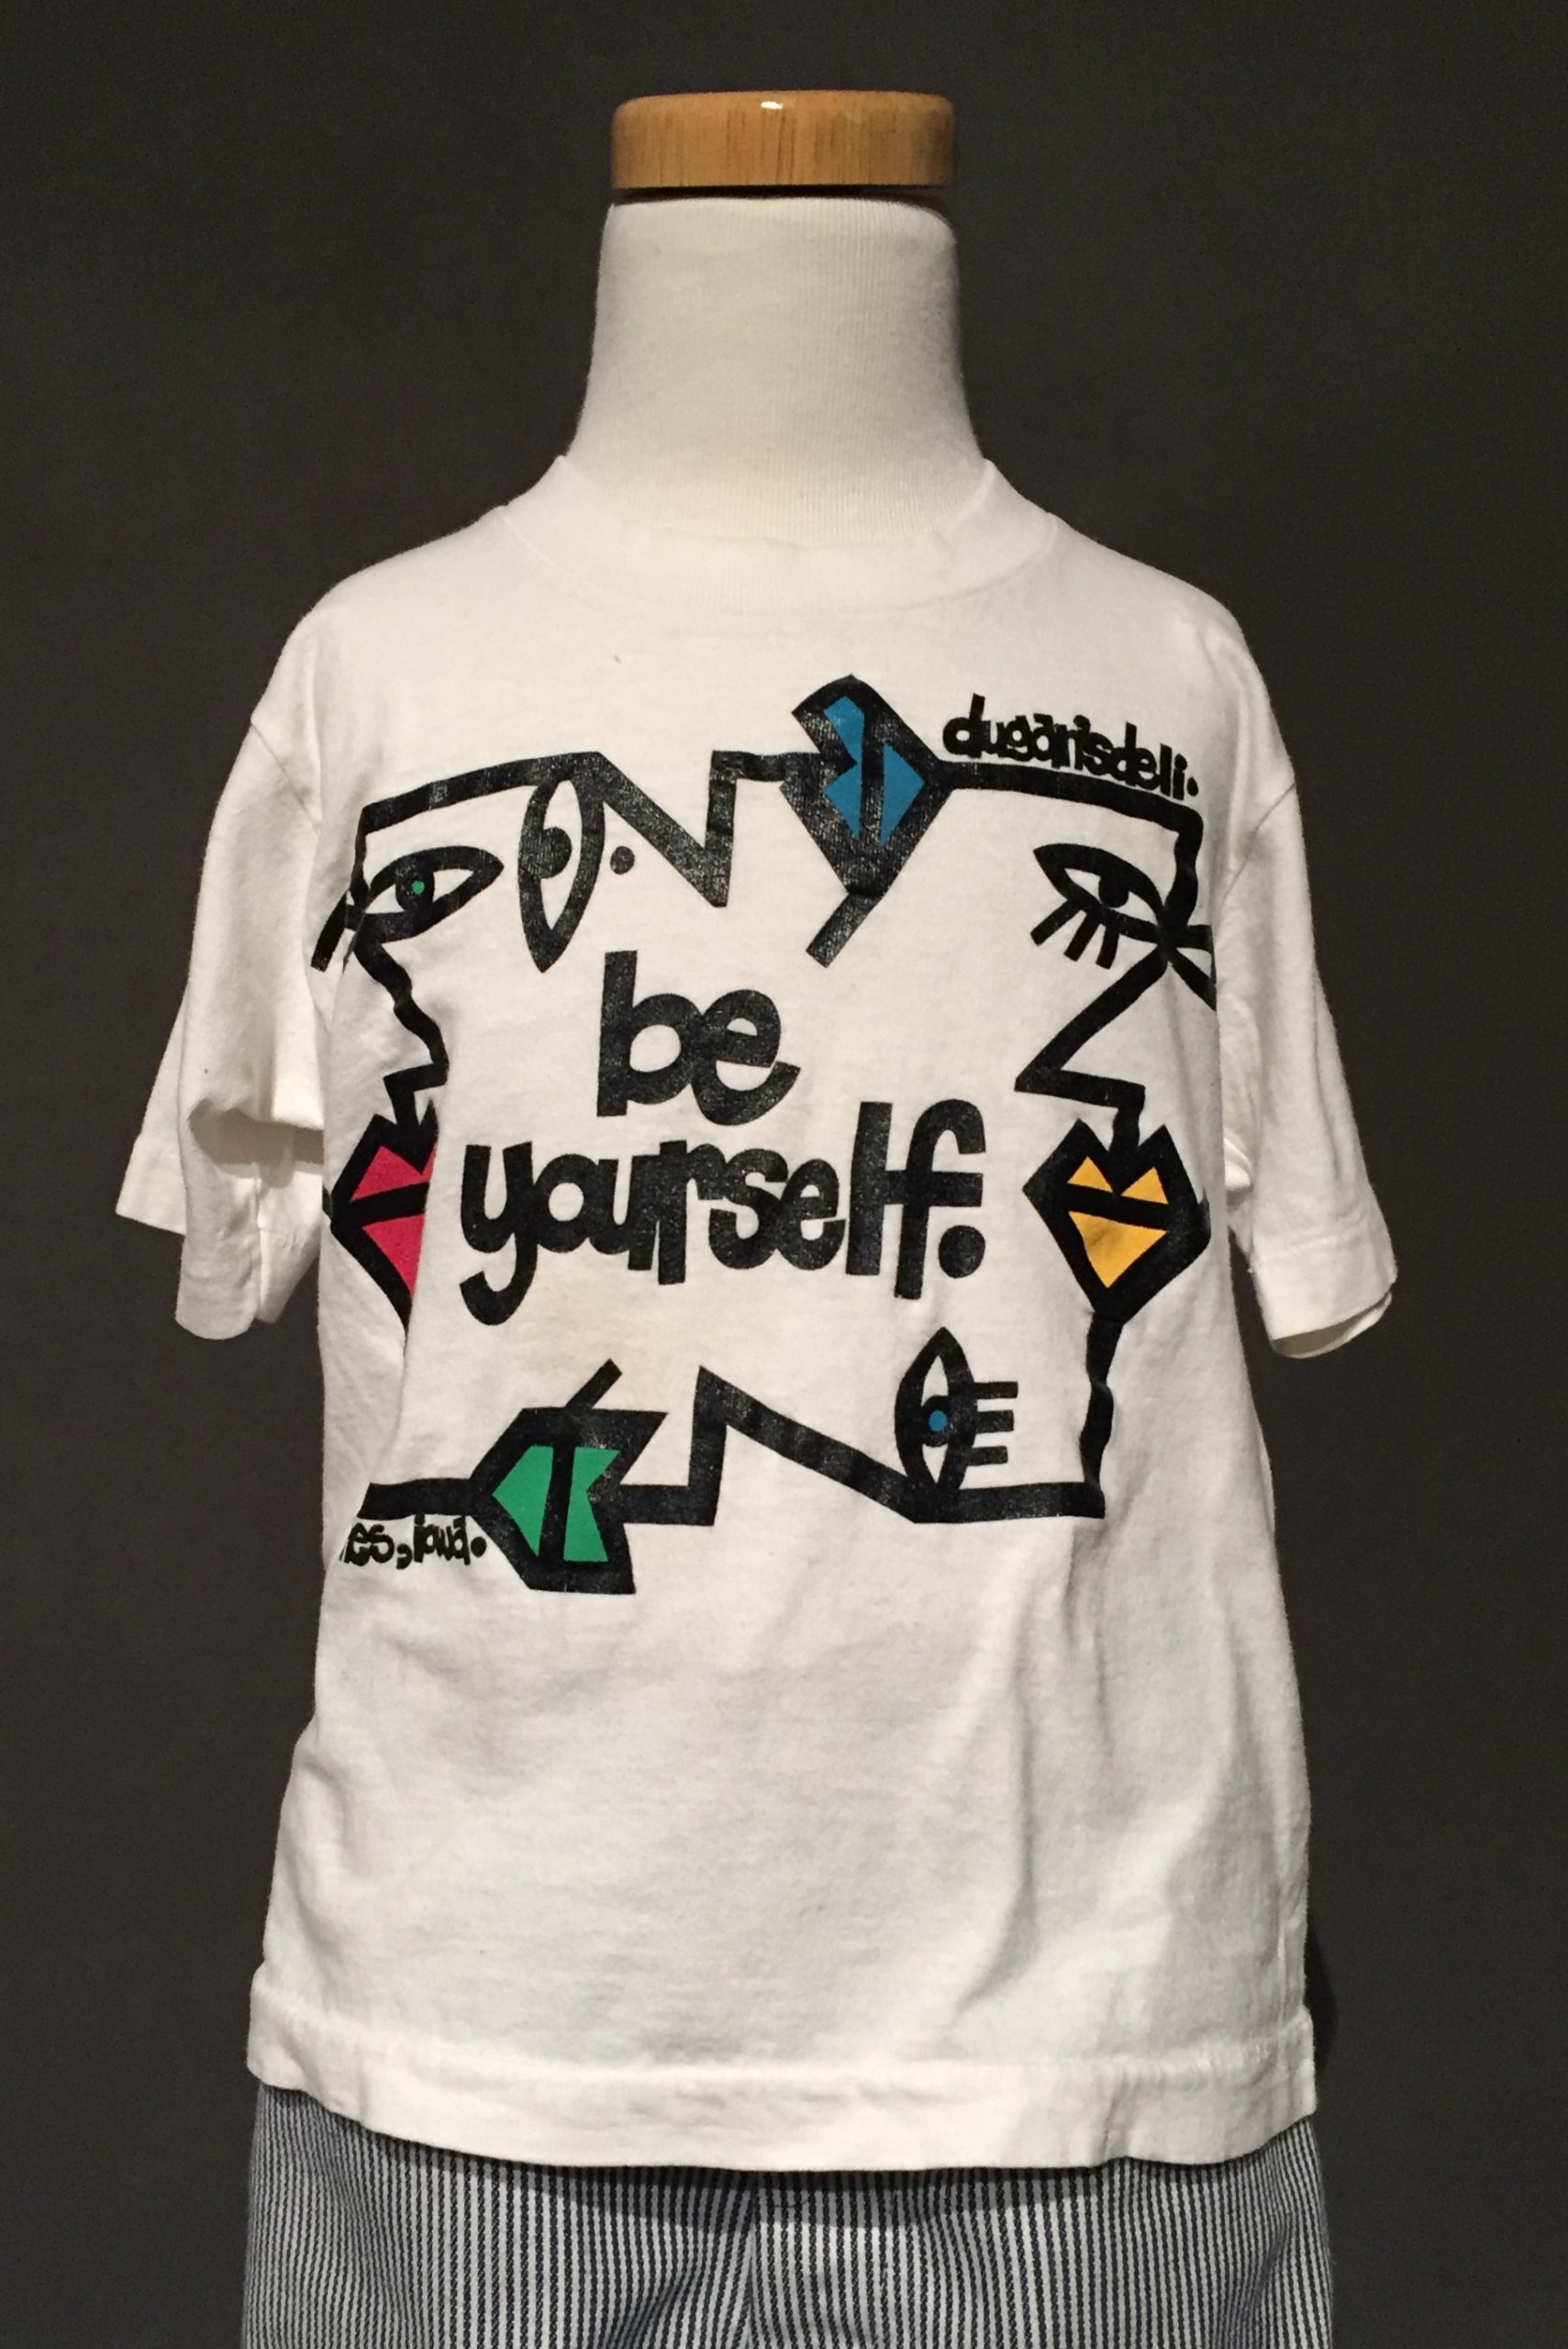 White short sleeve t-shirt with abstract geometric faces and black text reading: "Be Yourself" paired with black and white striped cuffed jeans